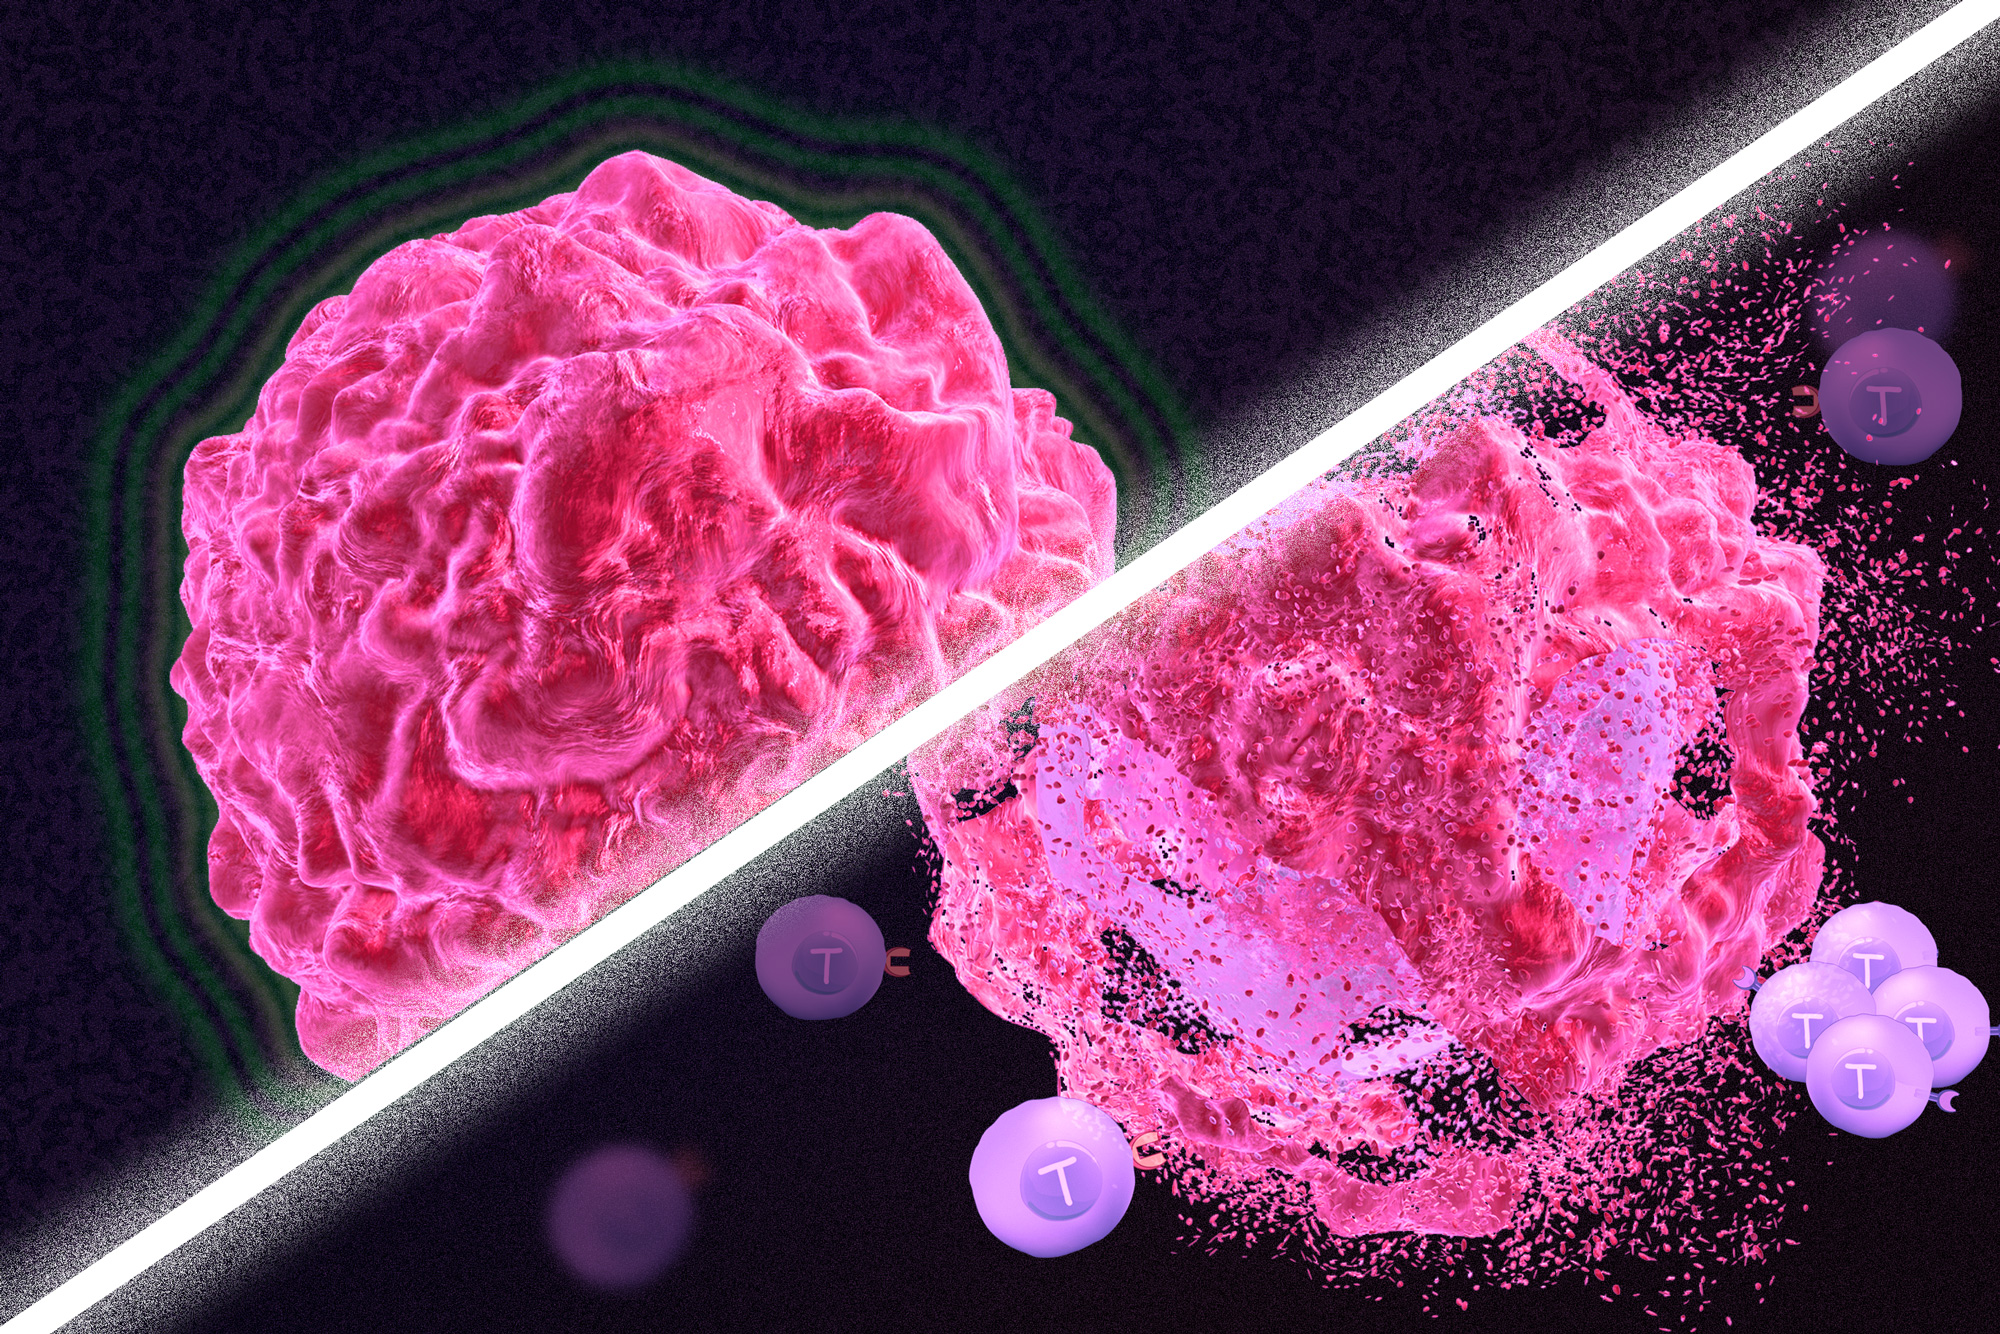 New cancer treatment may reawaken the immune system, MIT News